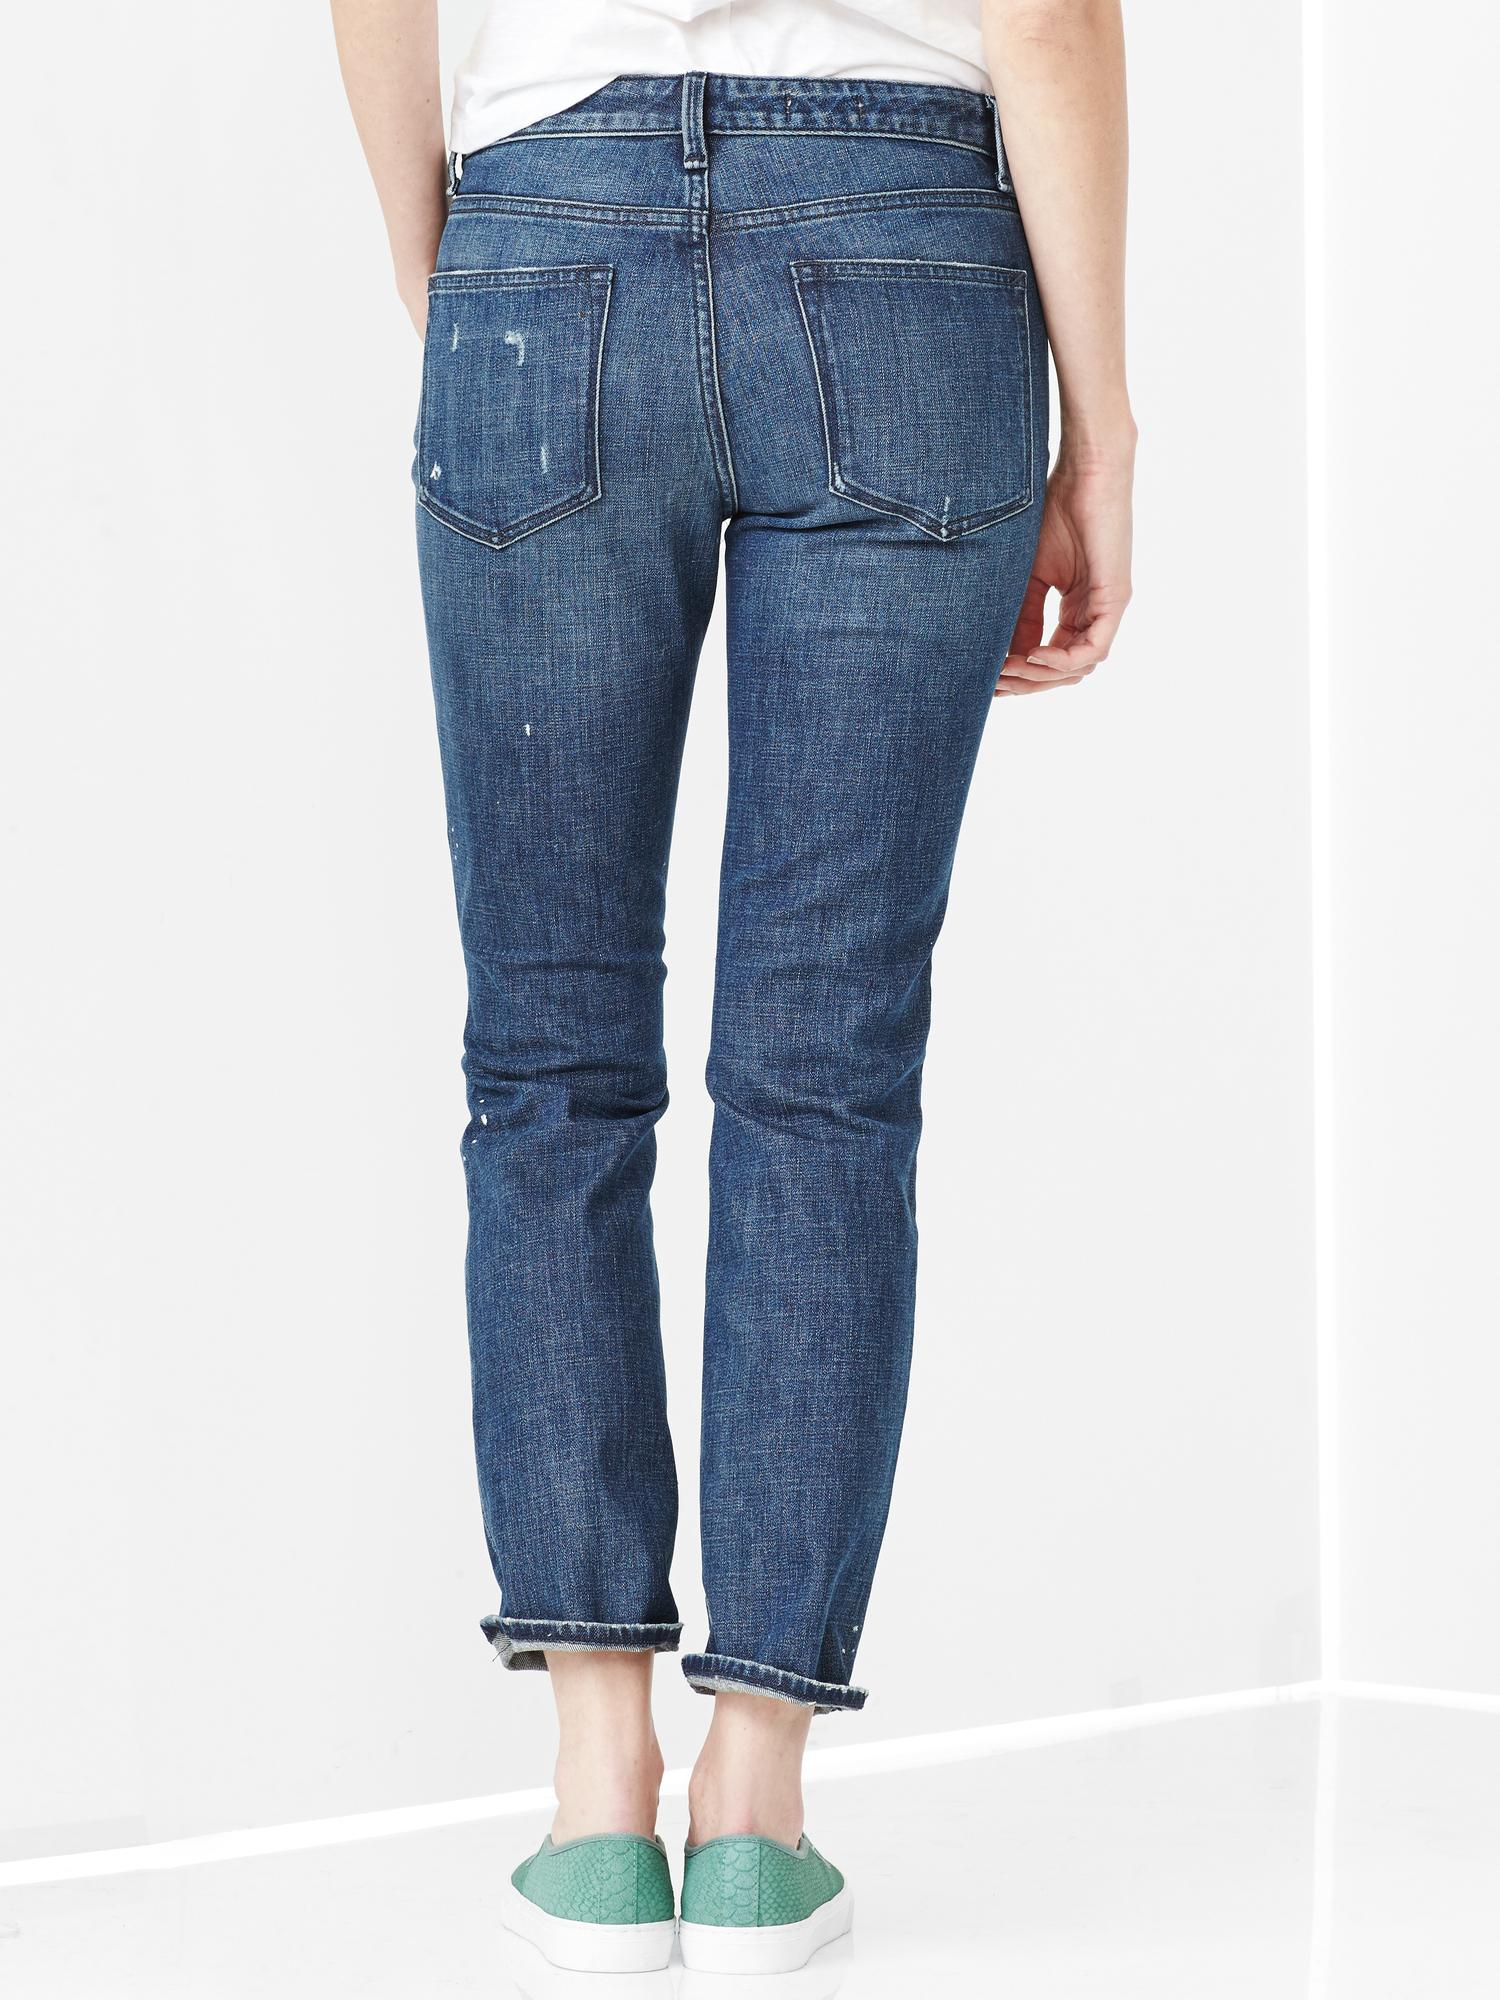 Gap 1969 Destructed Mid-Rise Real Straight Skimmer Jeans in Blue ...